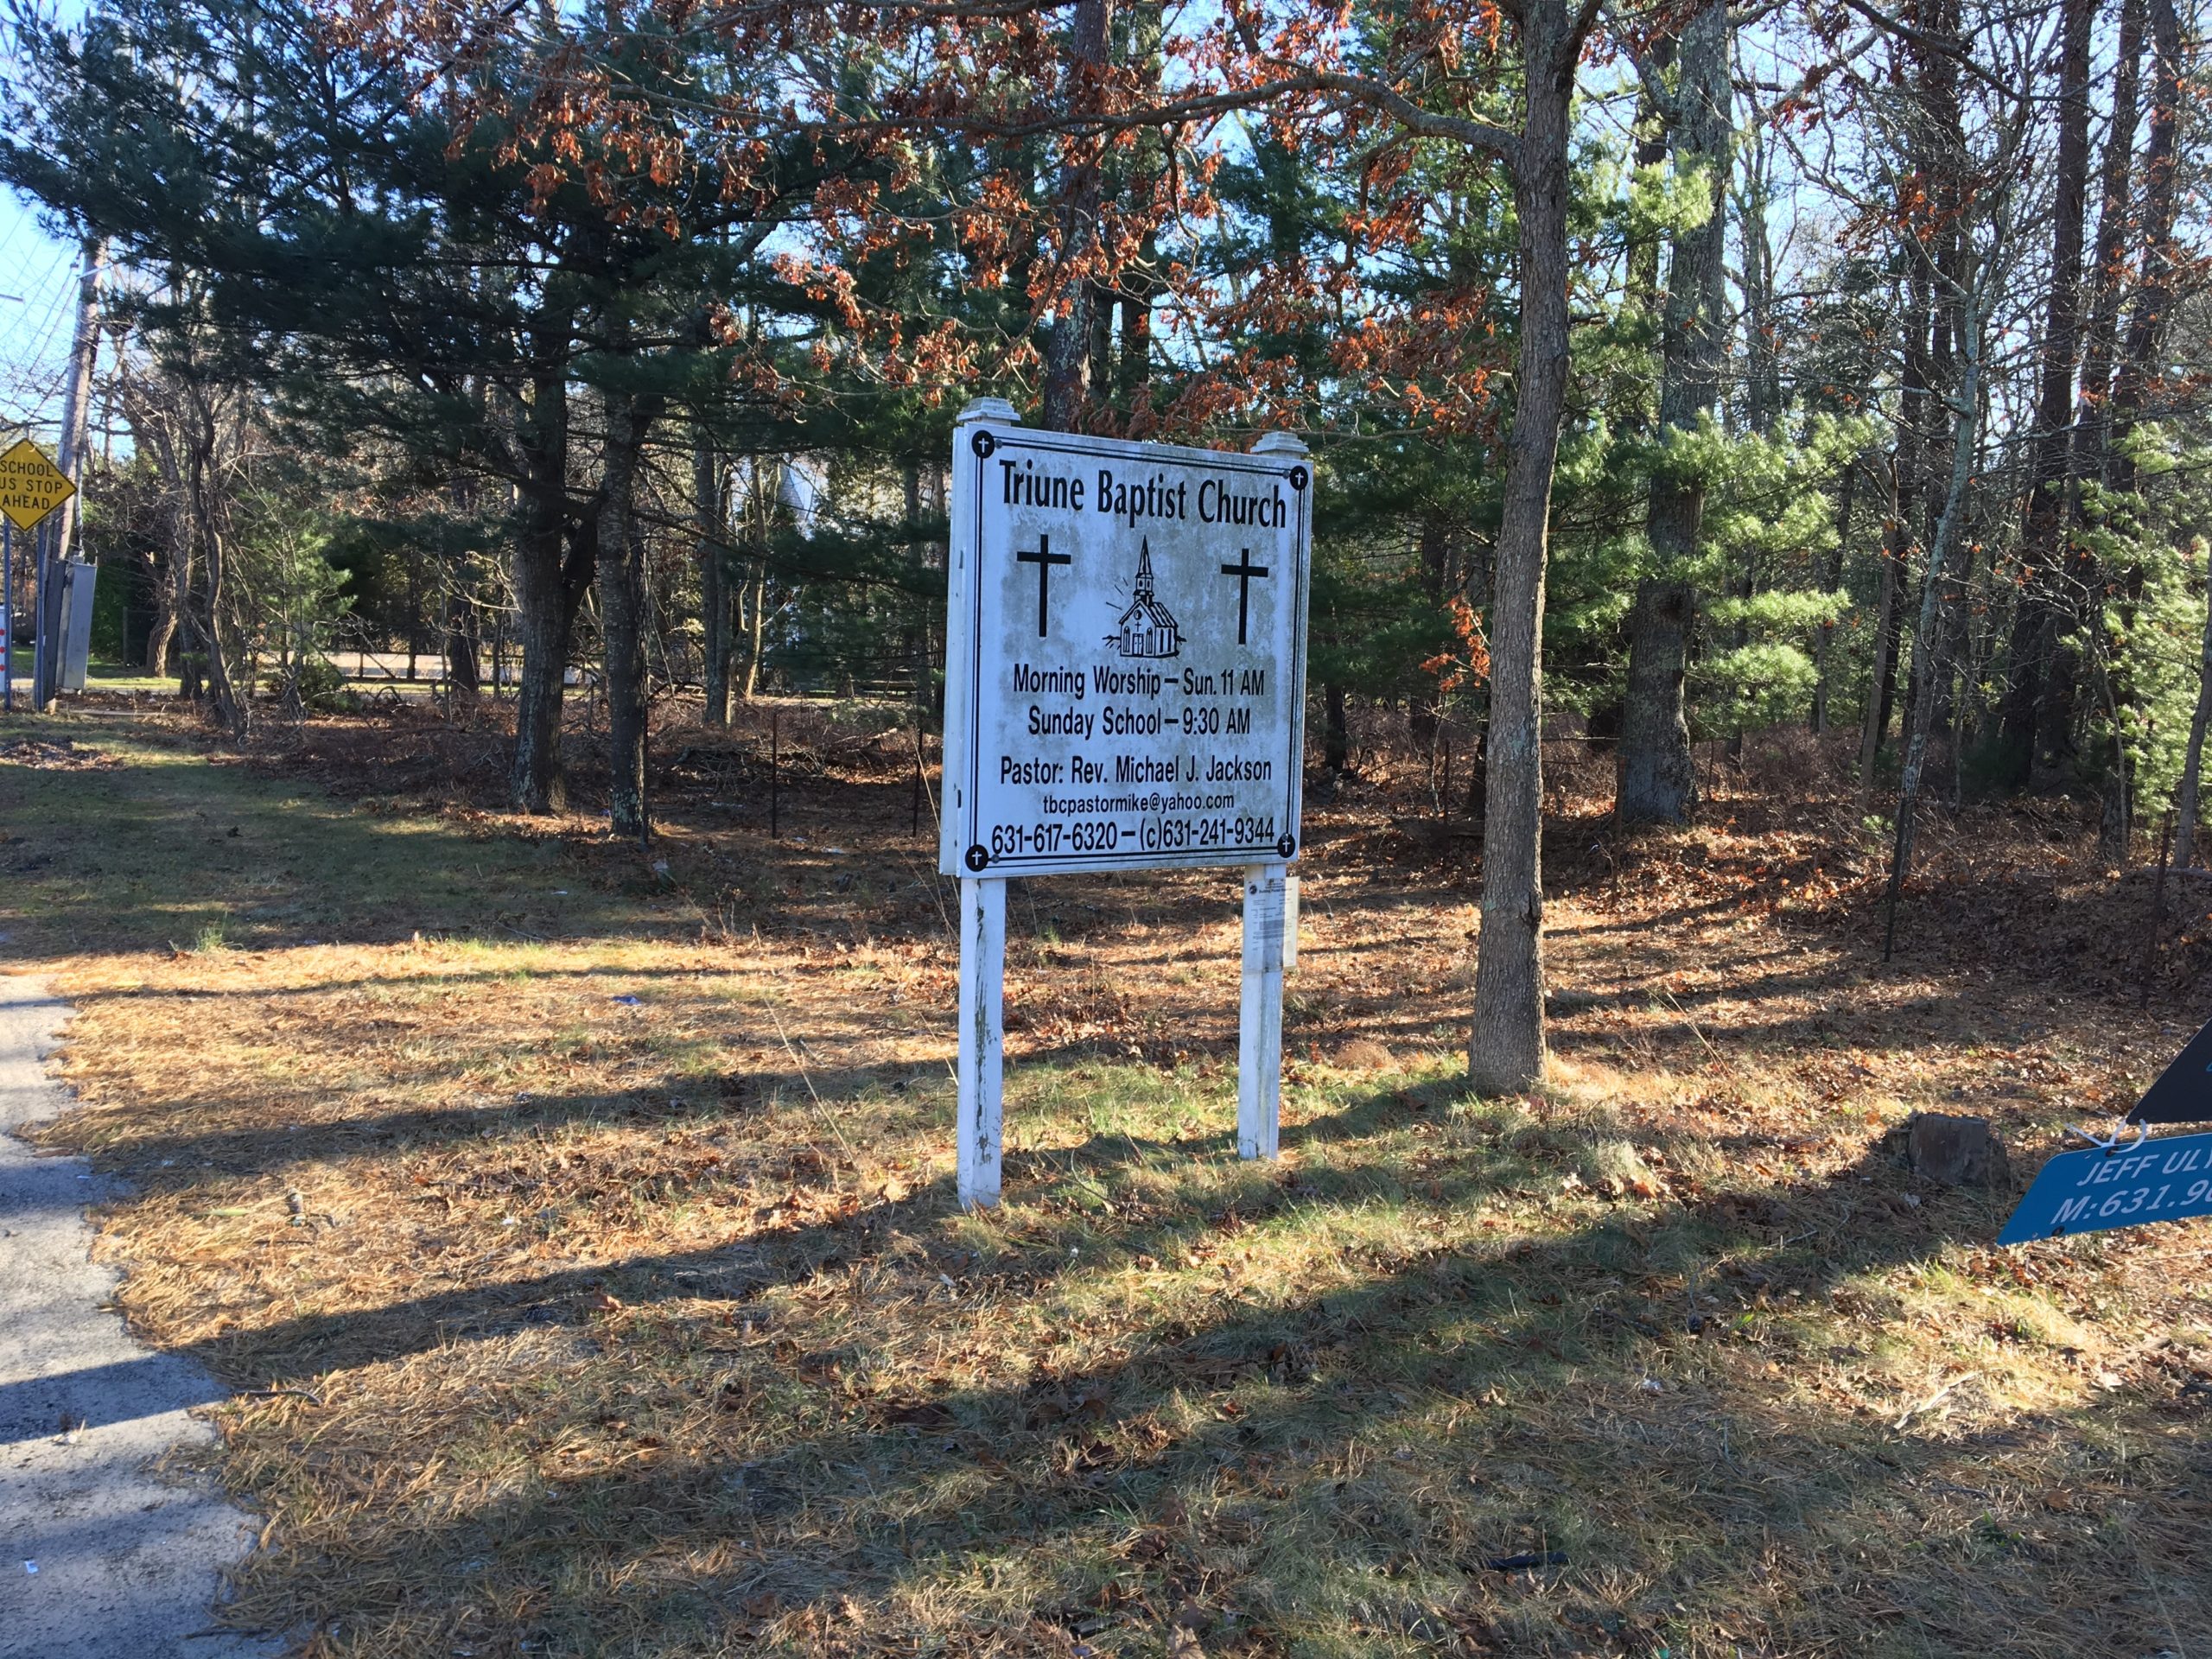 East Hampton Town has begun planning to develop affordable housing at the former Triune Baptist Church property, though there are several hurdles to achieving the number of units the town had hoped for when it purchased the land and a neighboring property in 2019.